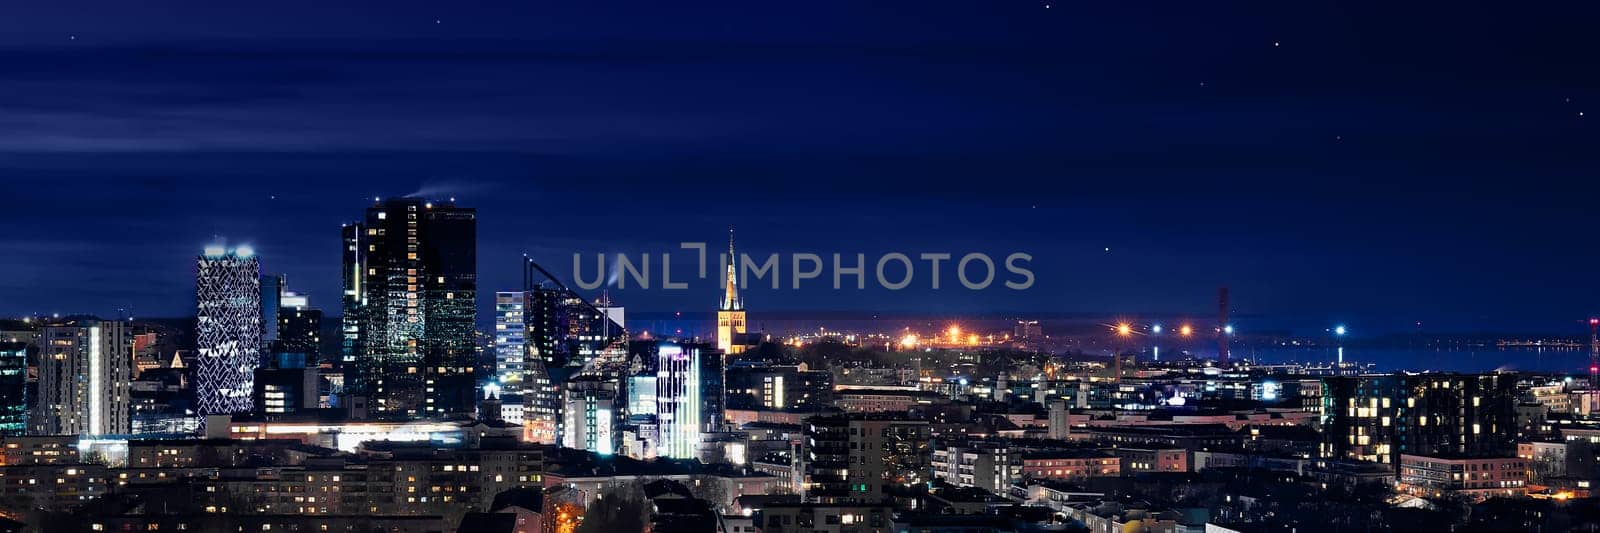 Panoramic view of the city at night. Tallinn, Estonia at night by PhotoTime